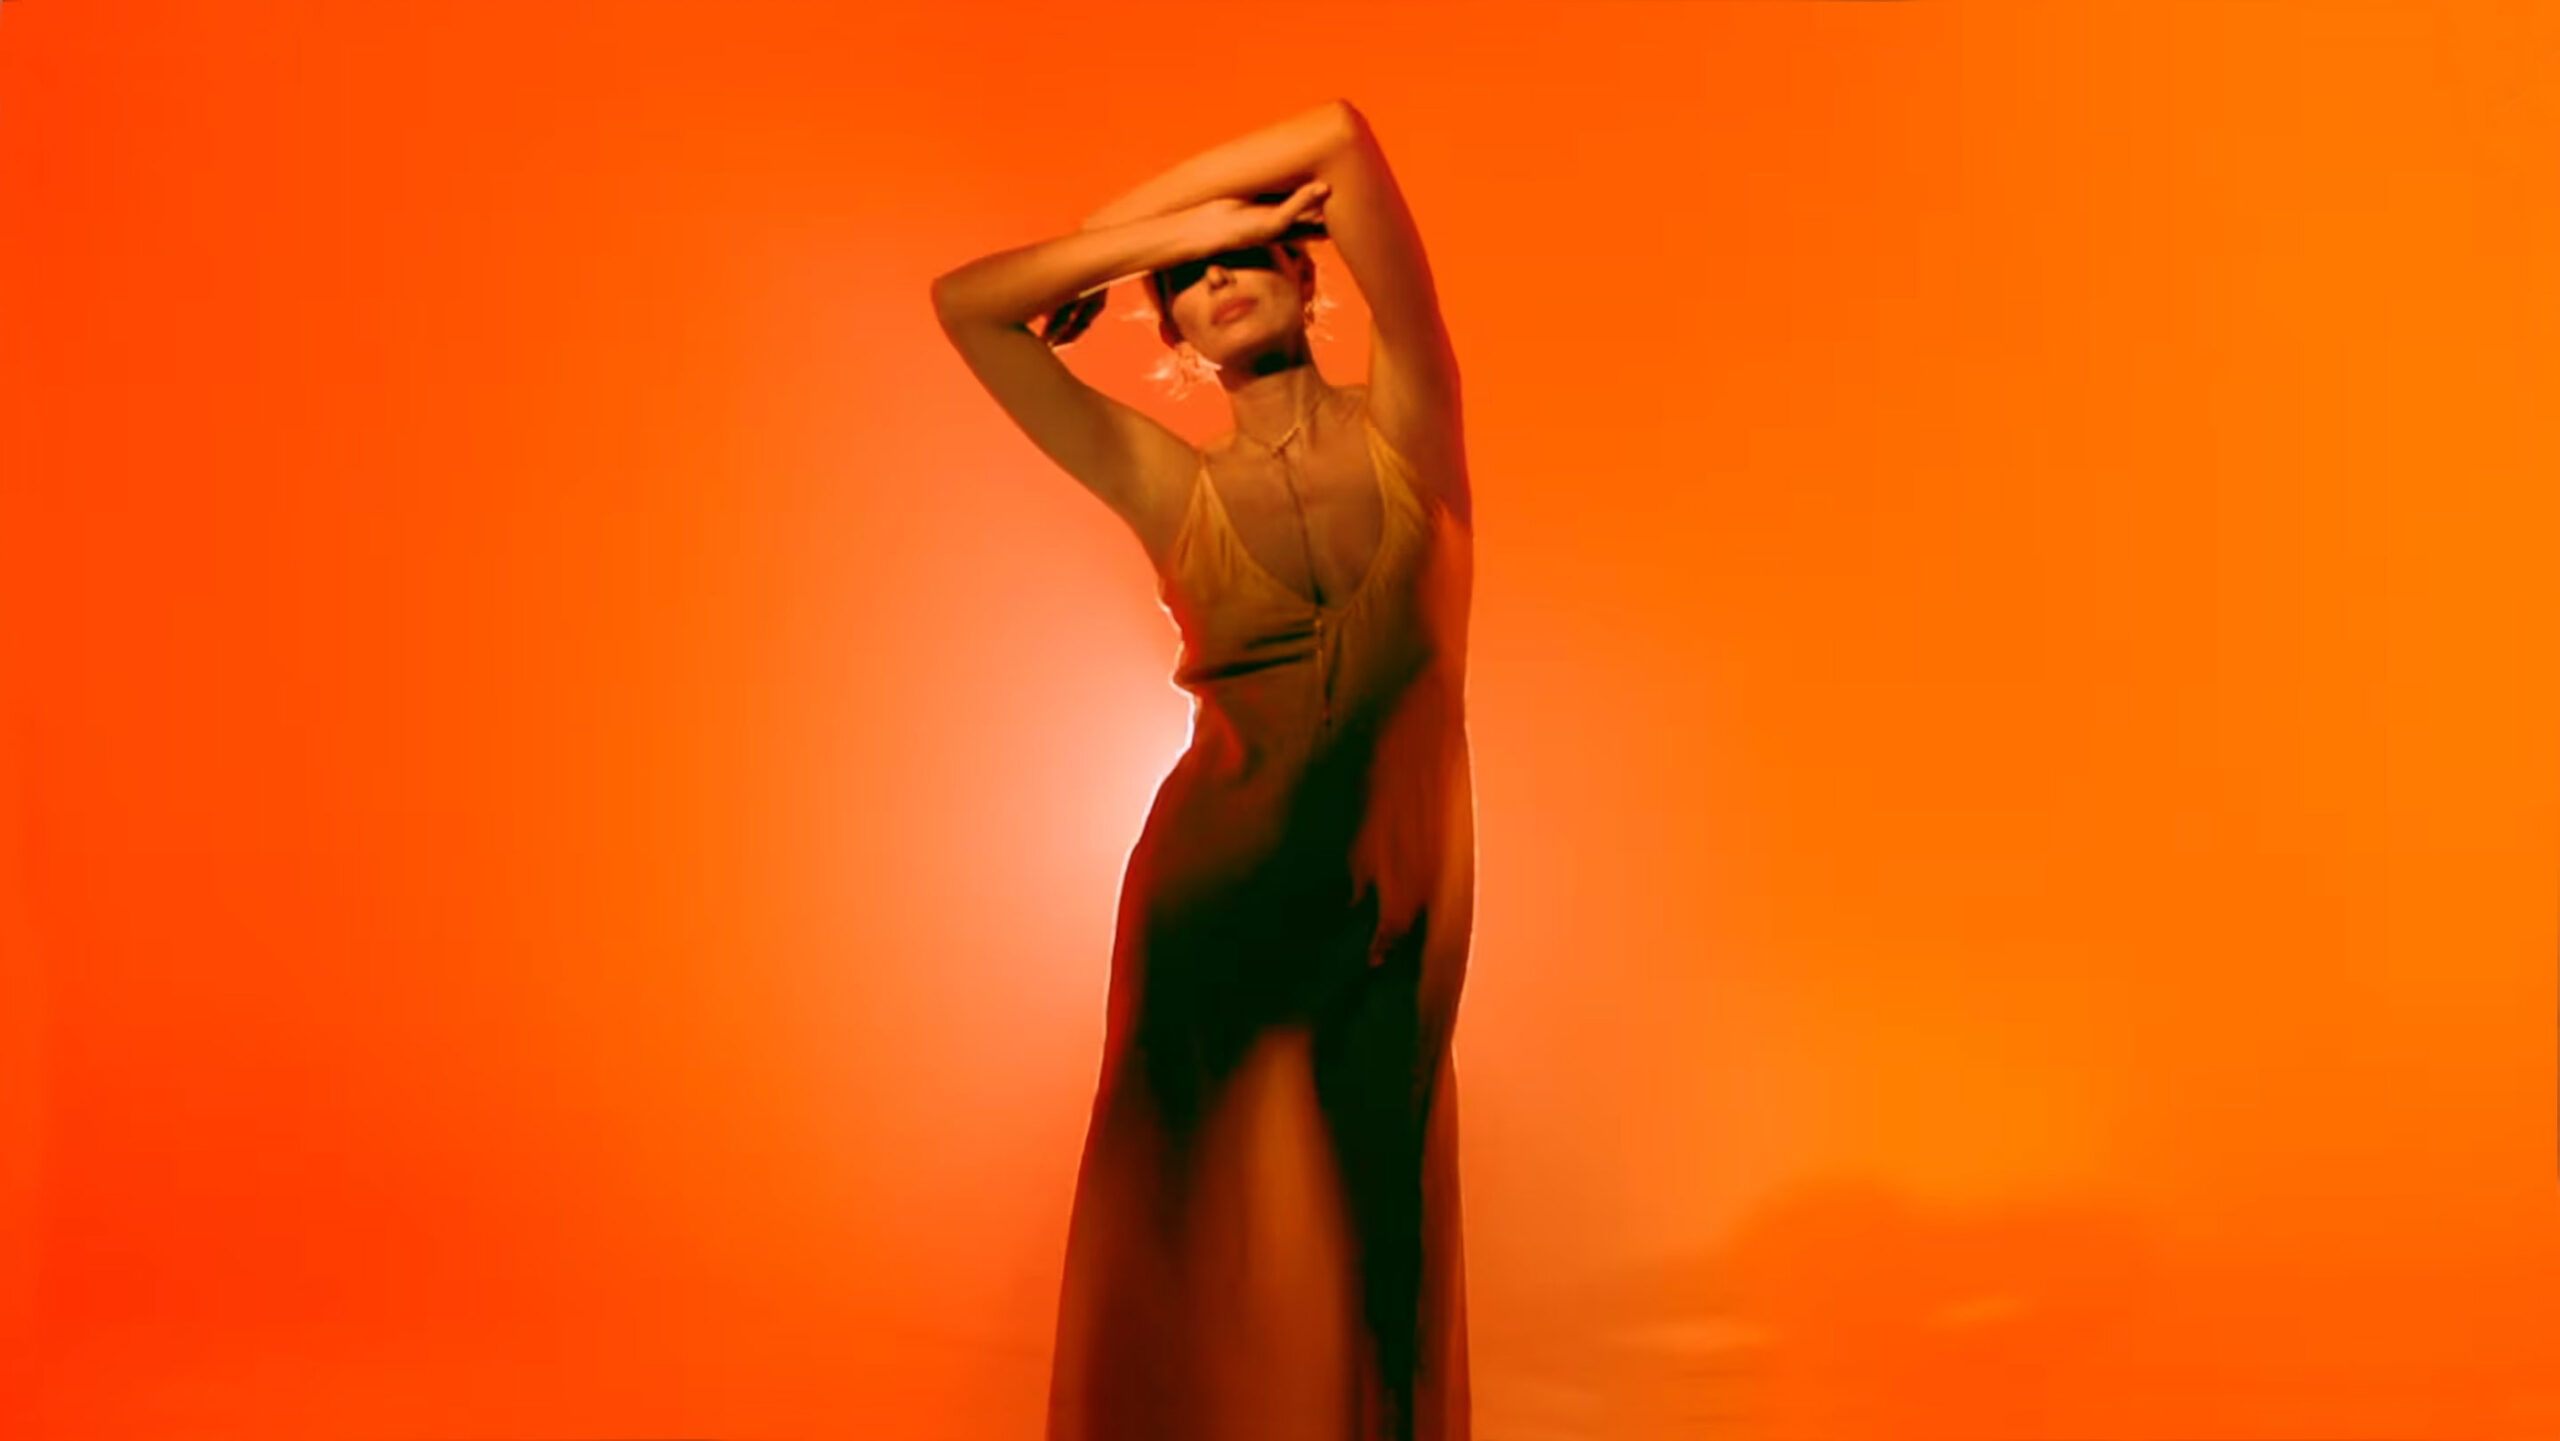 Still from a perfumery advertisement as an example of the use of color. Woman with skin-colored dress, on orange background illuminated by warm light.